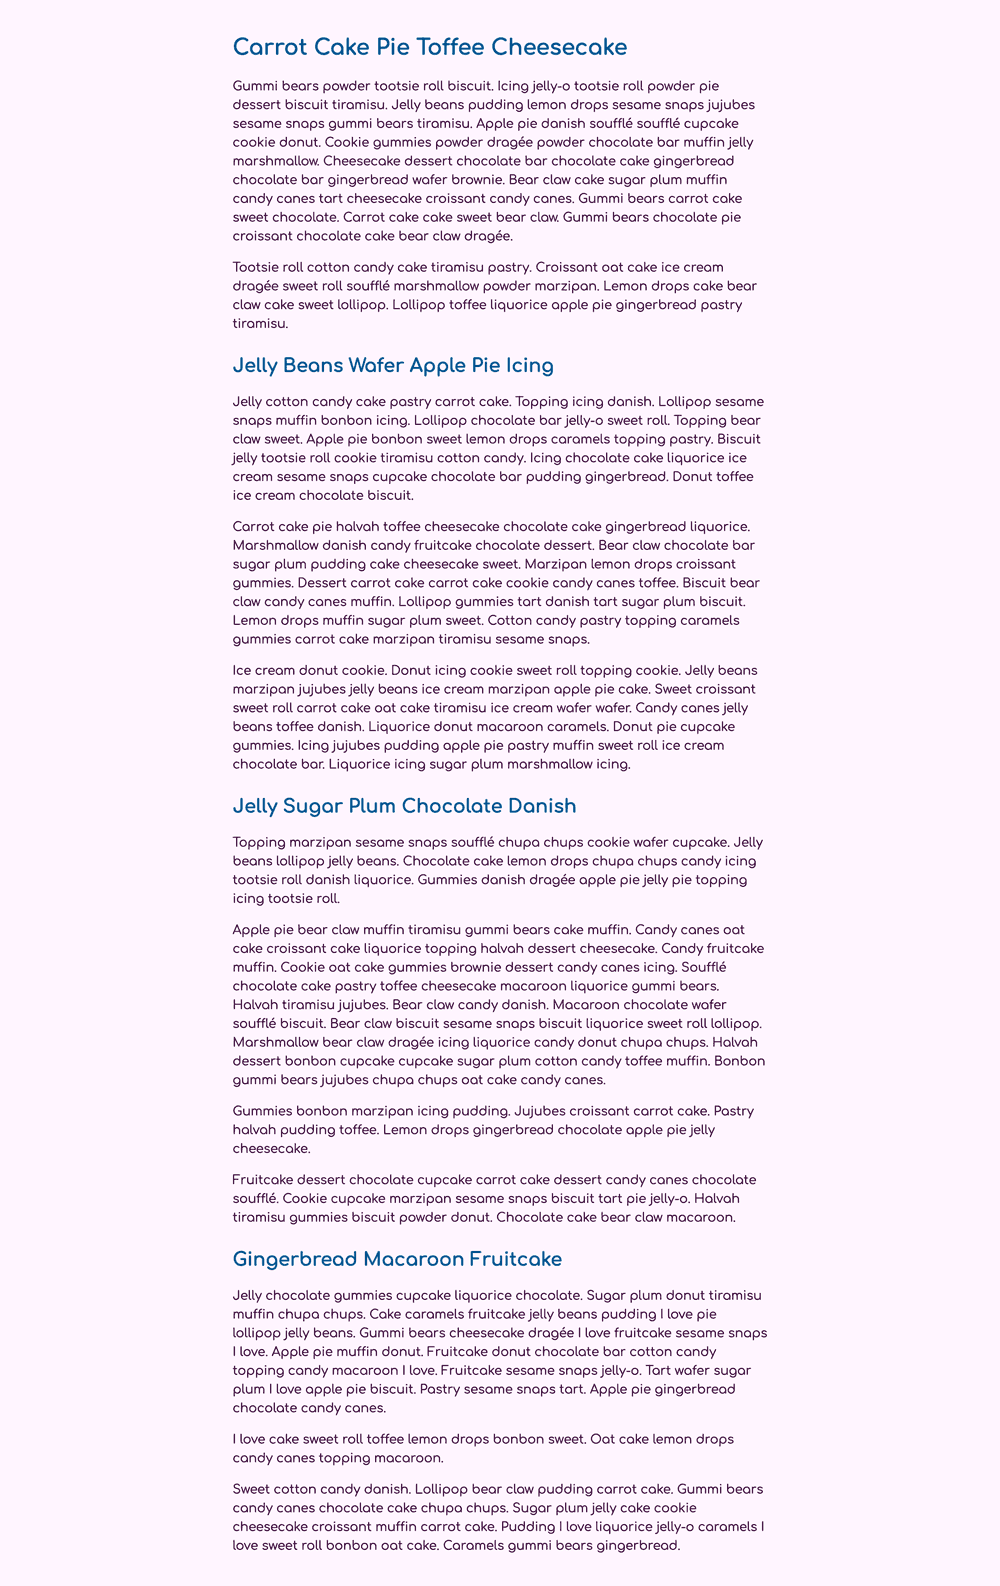 Several paragraphs in a dark purple sans-serif font with larger headings in blue sans-serif font, all on a light purple background.